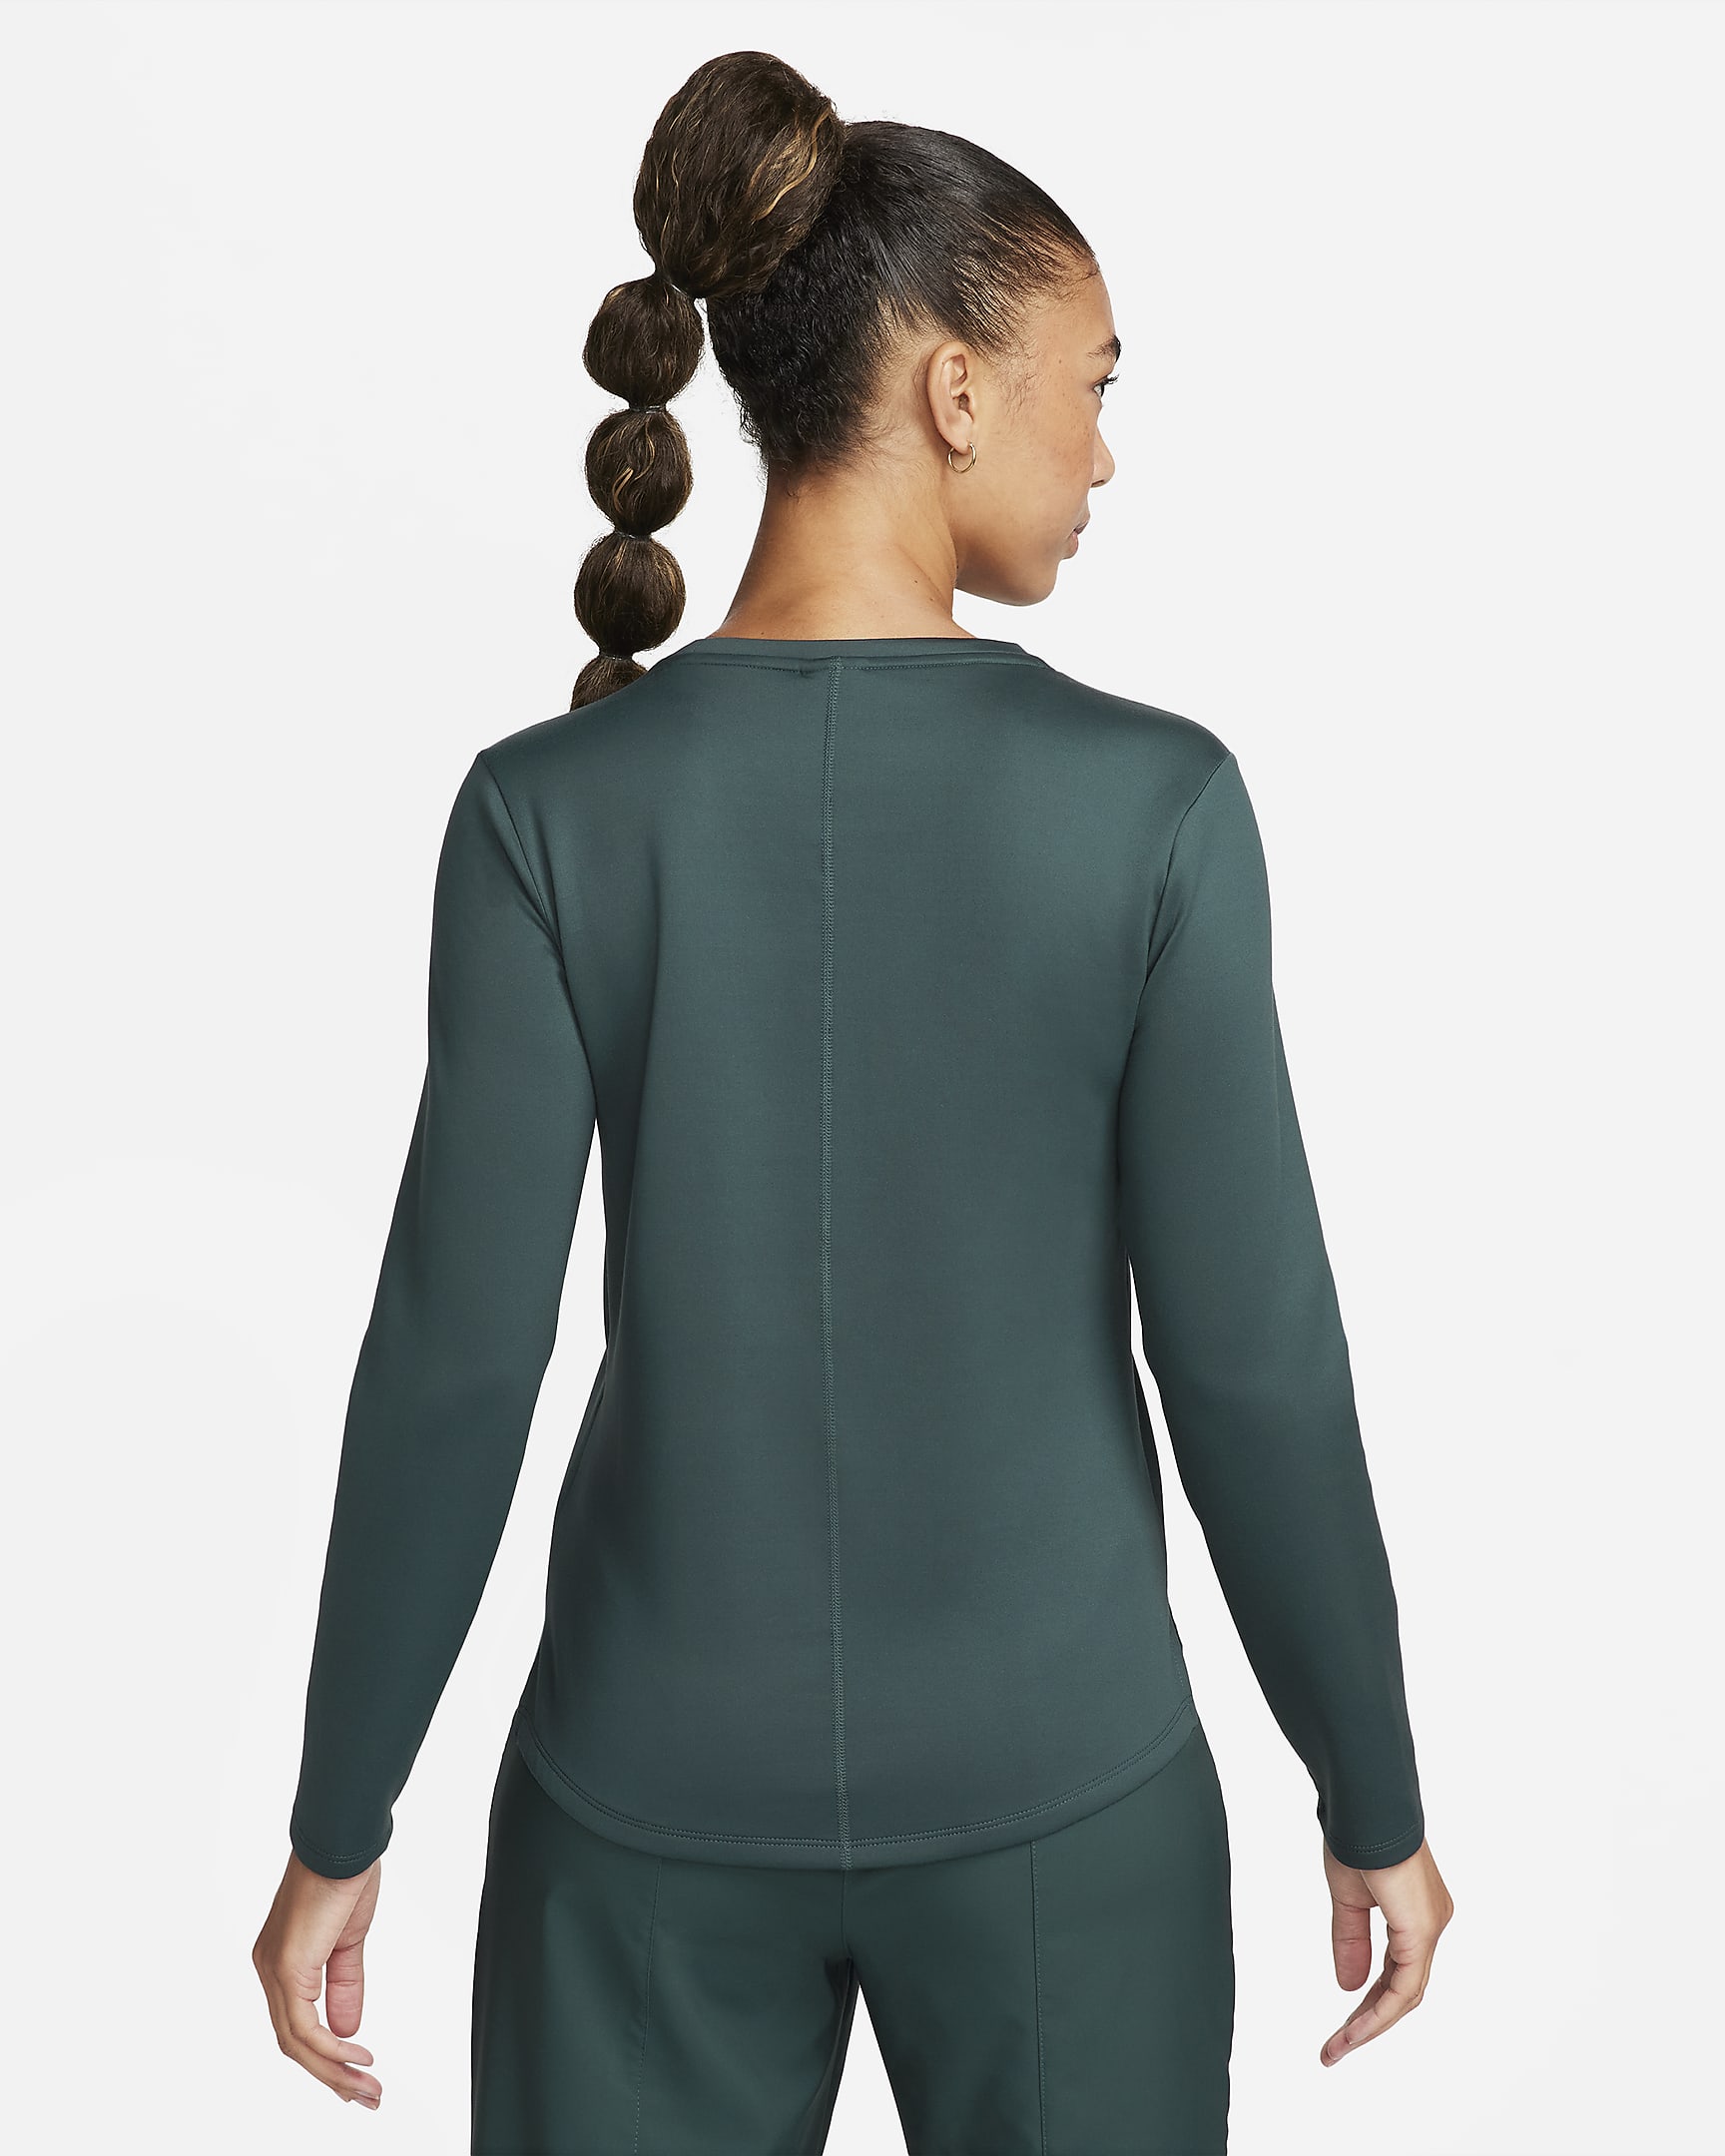 Nike Therma-FIT One Women's Long-Sleeve Top. Nike SE